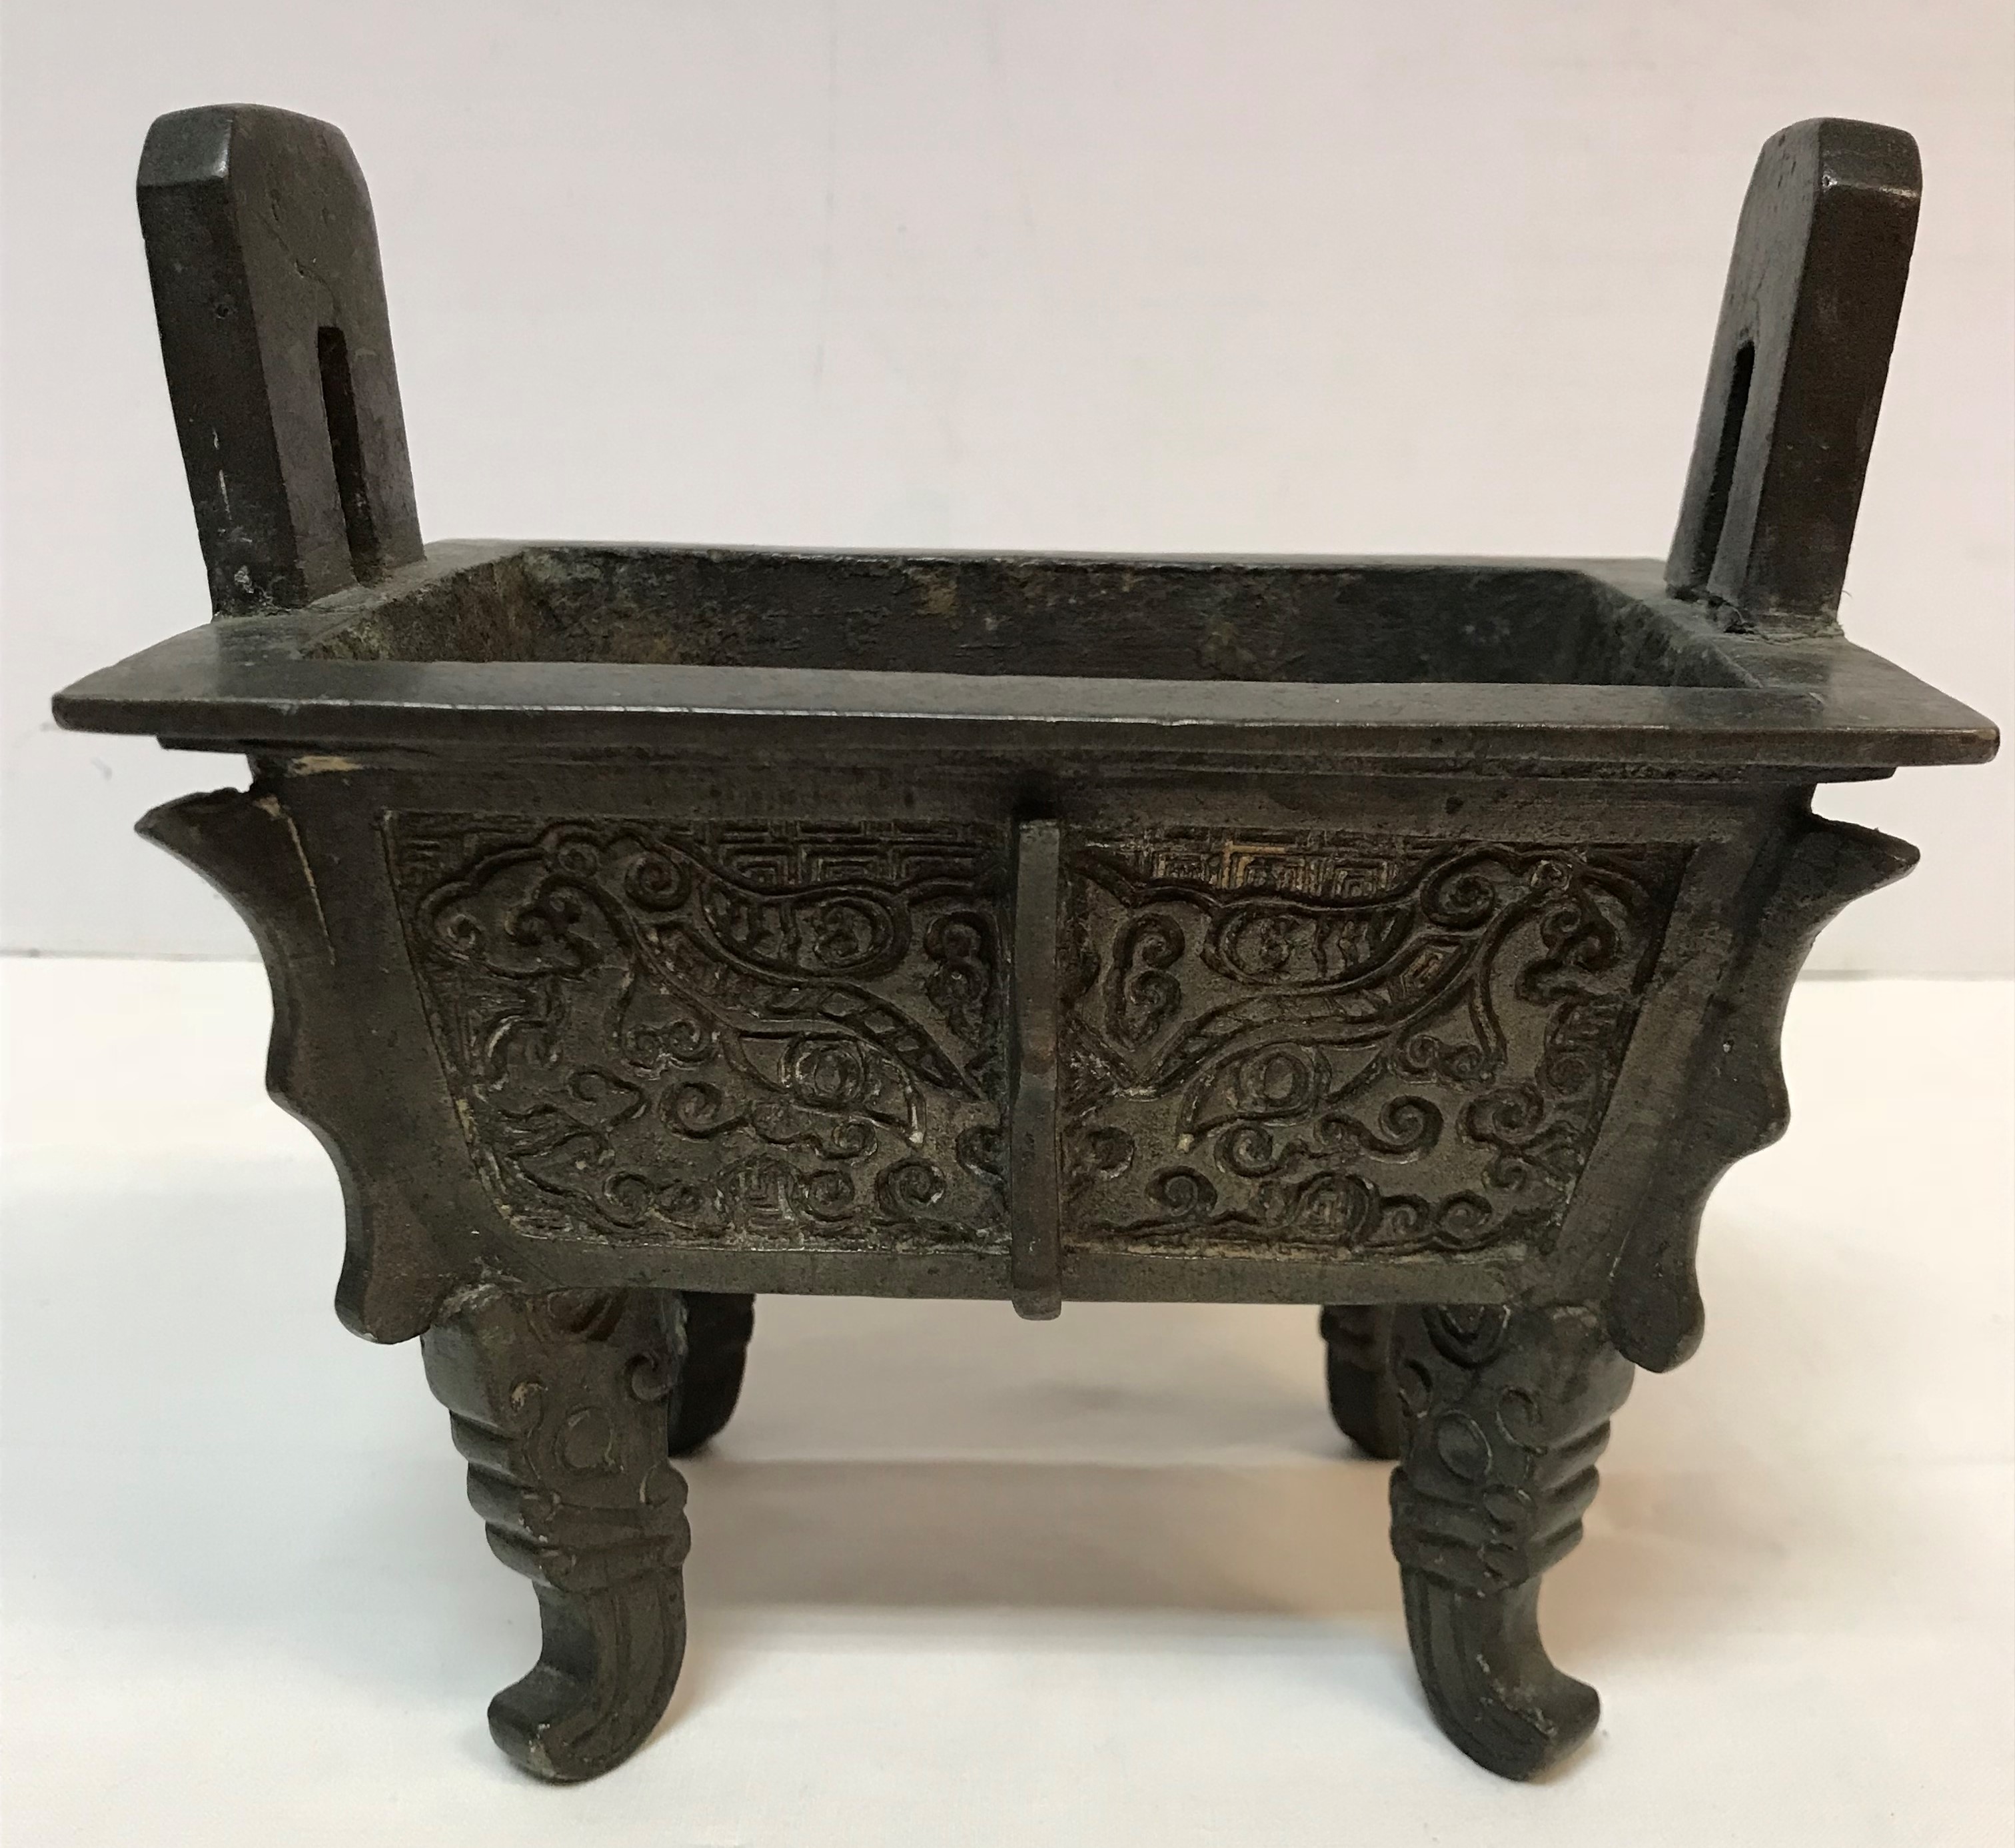 A Chinese bronze censer of rectangular form with relief work foliate decoration,